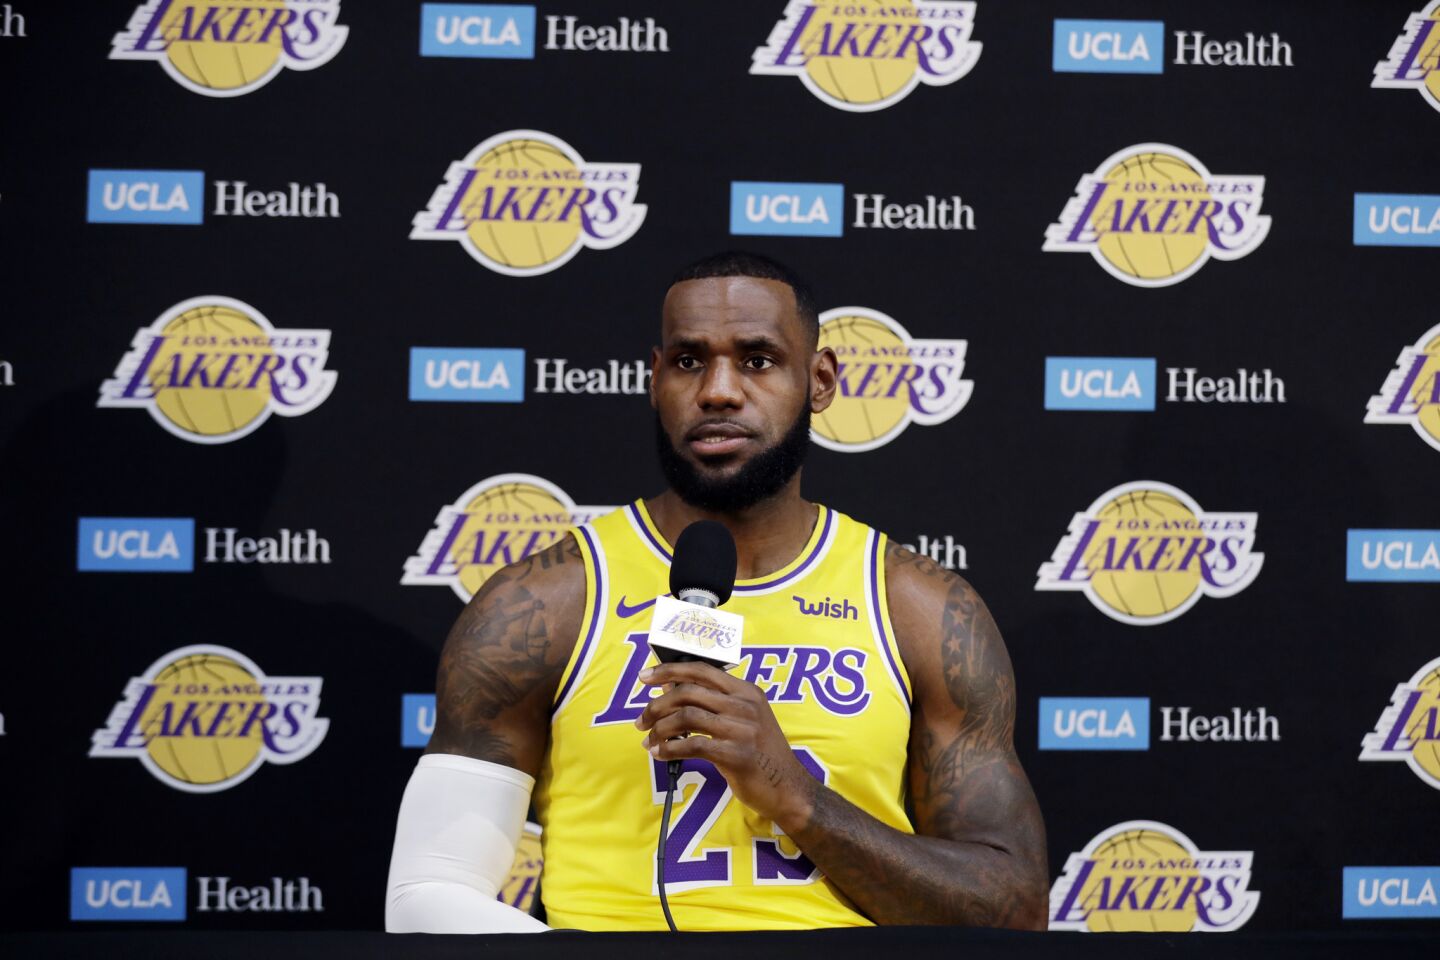 Los Angeles Lakers' LeBron James fields questions during media day at the NBA basketball team's practice facility Monday, Sept. 24, 2018, in El Segundo, Calif. (AP Photo/Marcio Jose Sanchez)